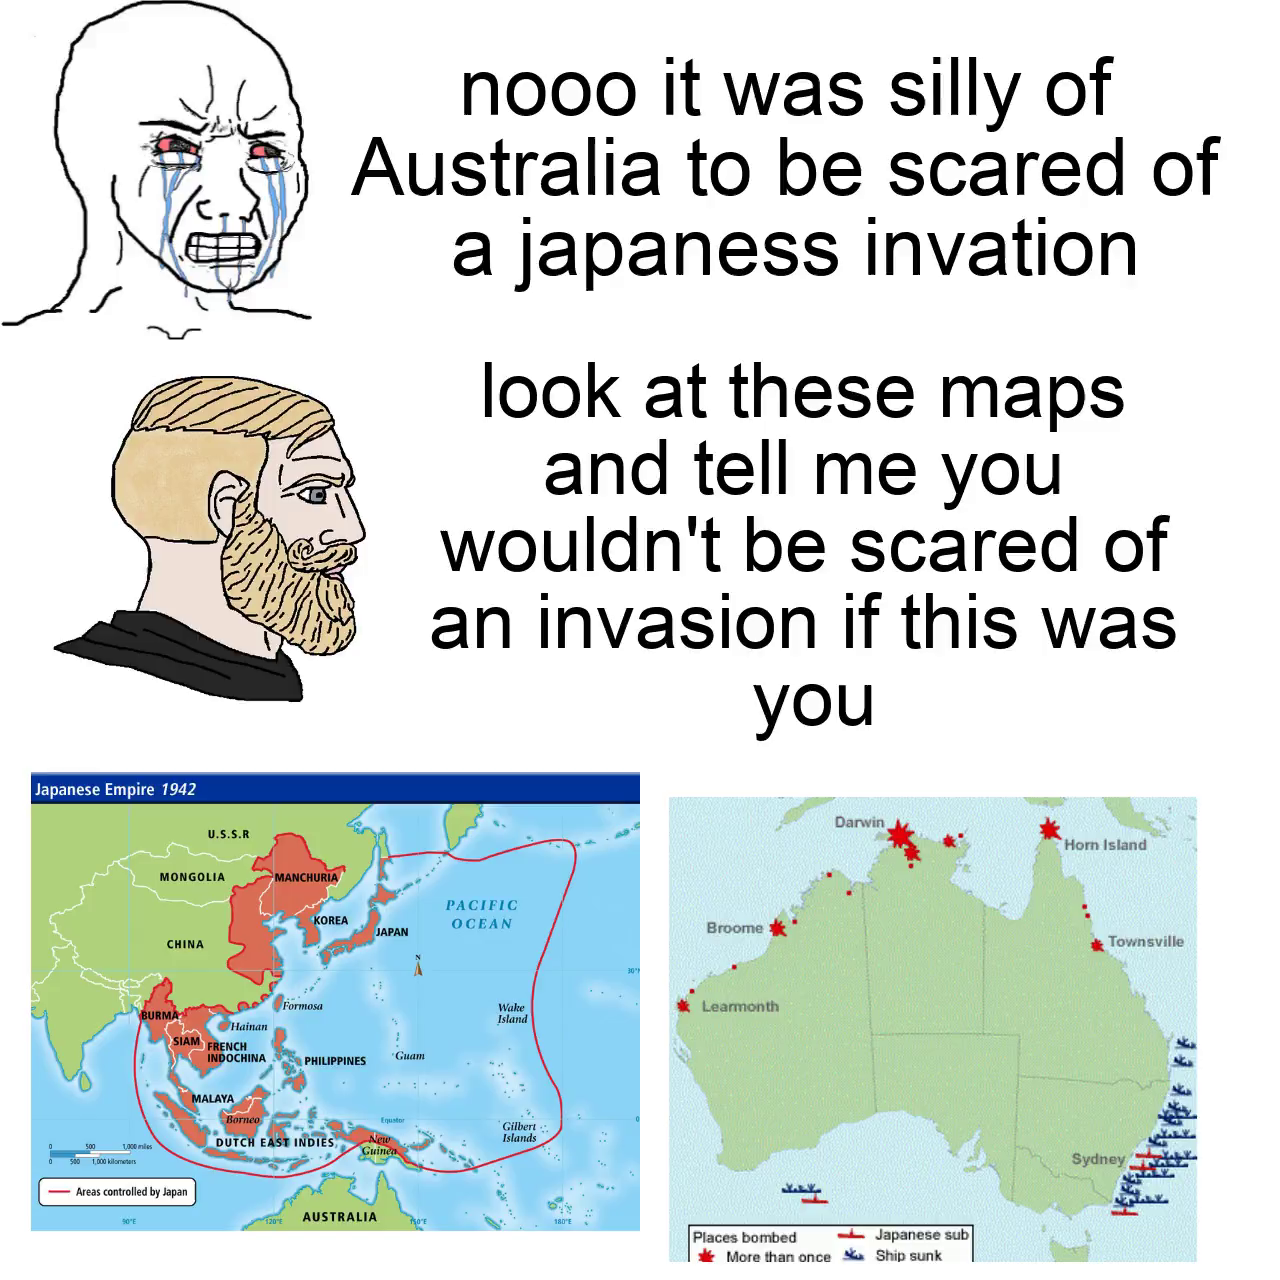 id be shitting my self if the previously unbeaten Japanese empire was that close